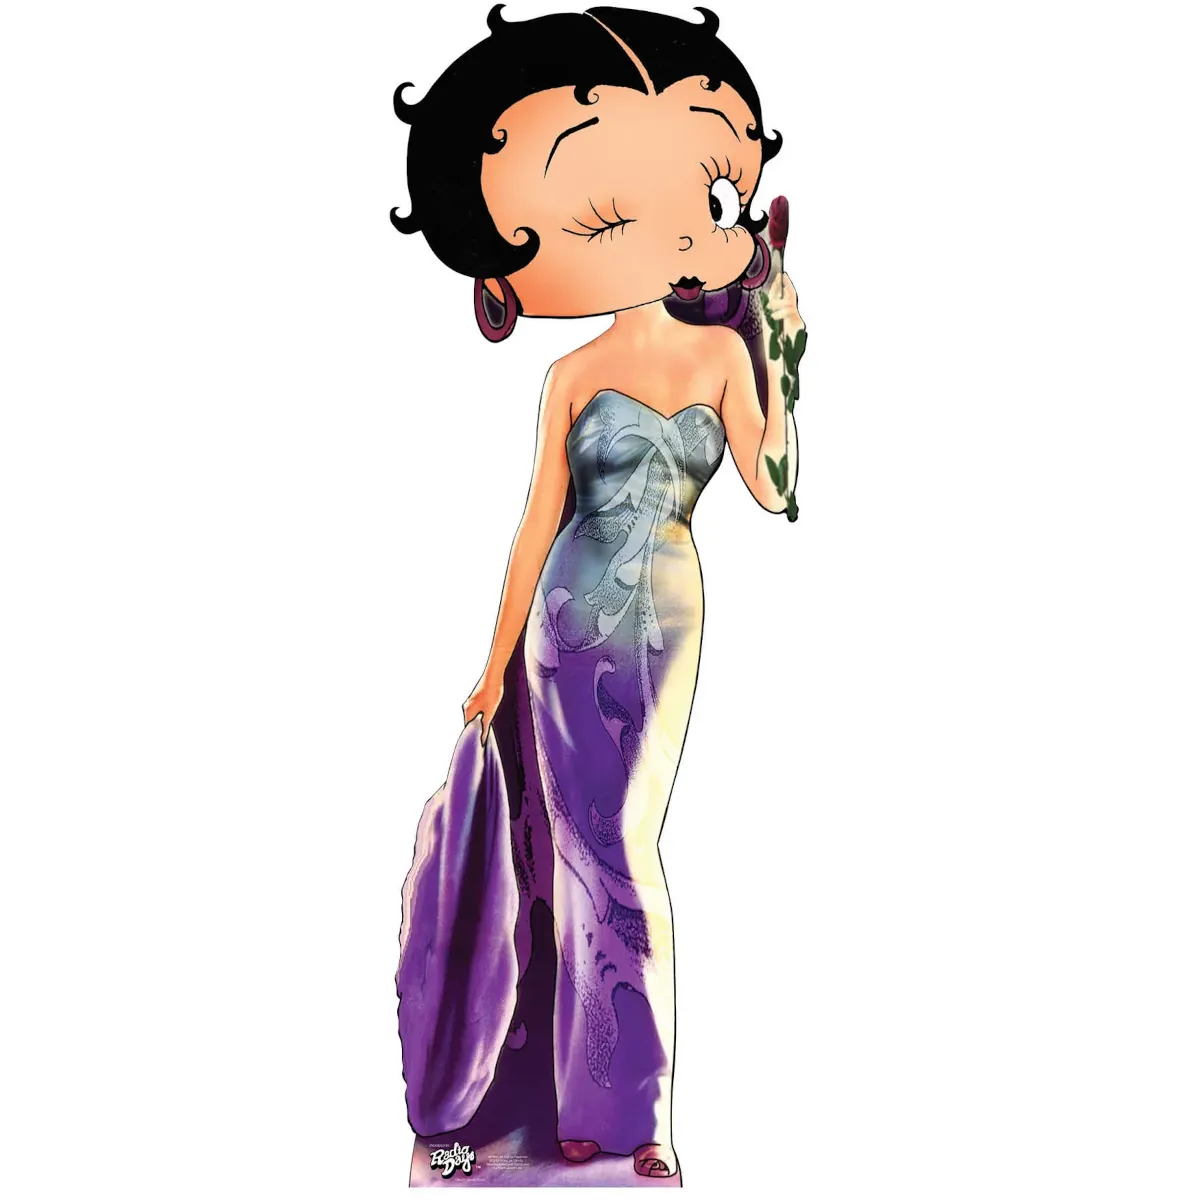 SC519 Betty Boop (Gilda) Official Lifesize Cardboard Cutout Standee Front